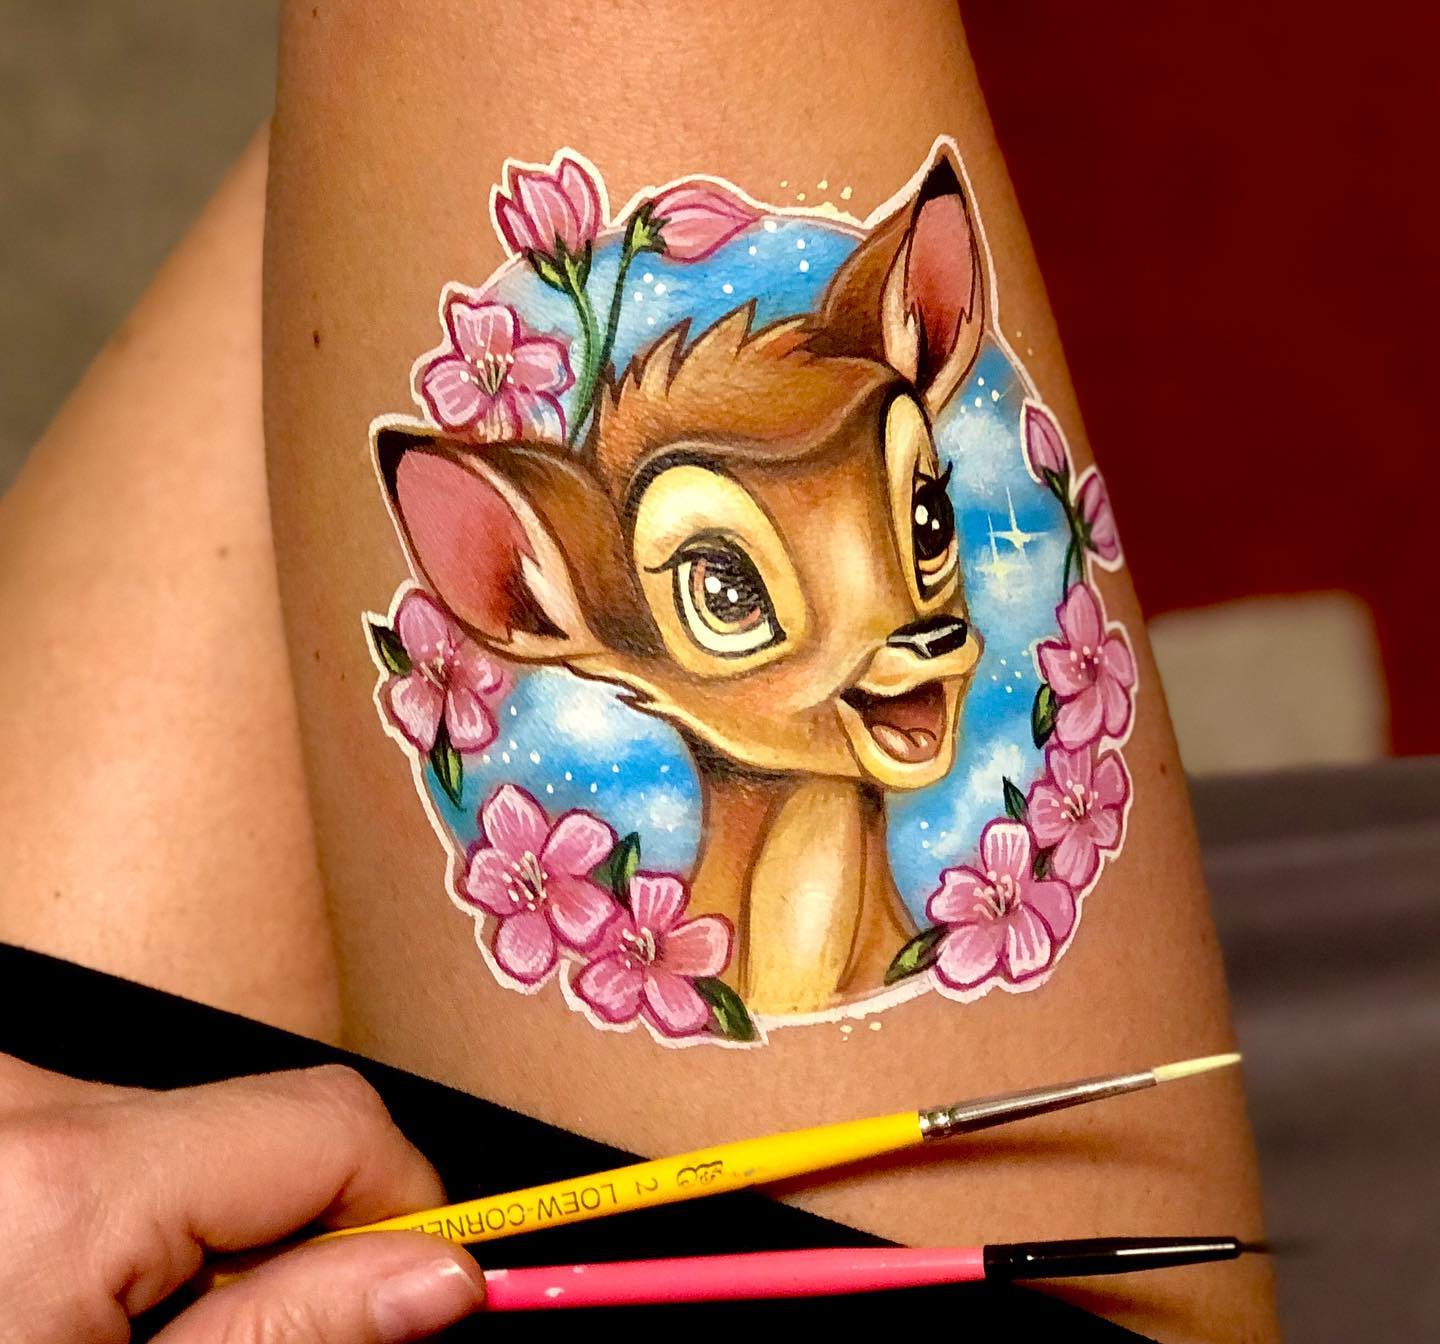 easy body painting ideas for beginners